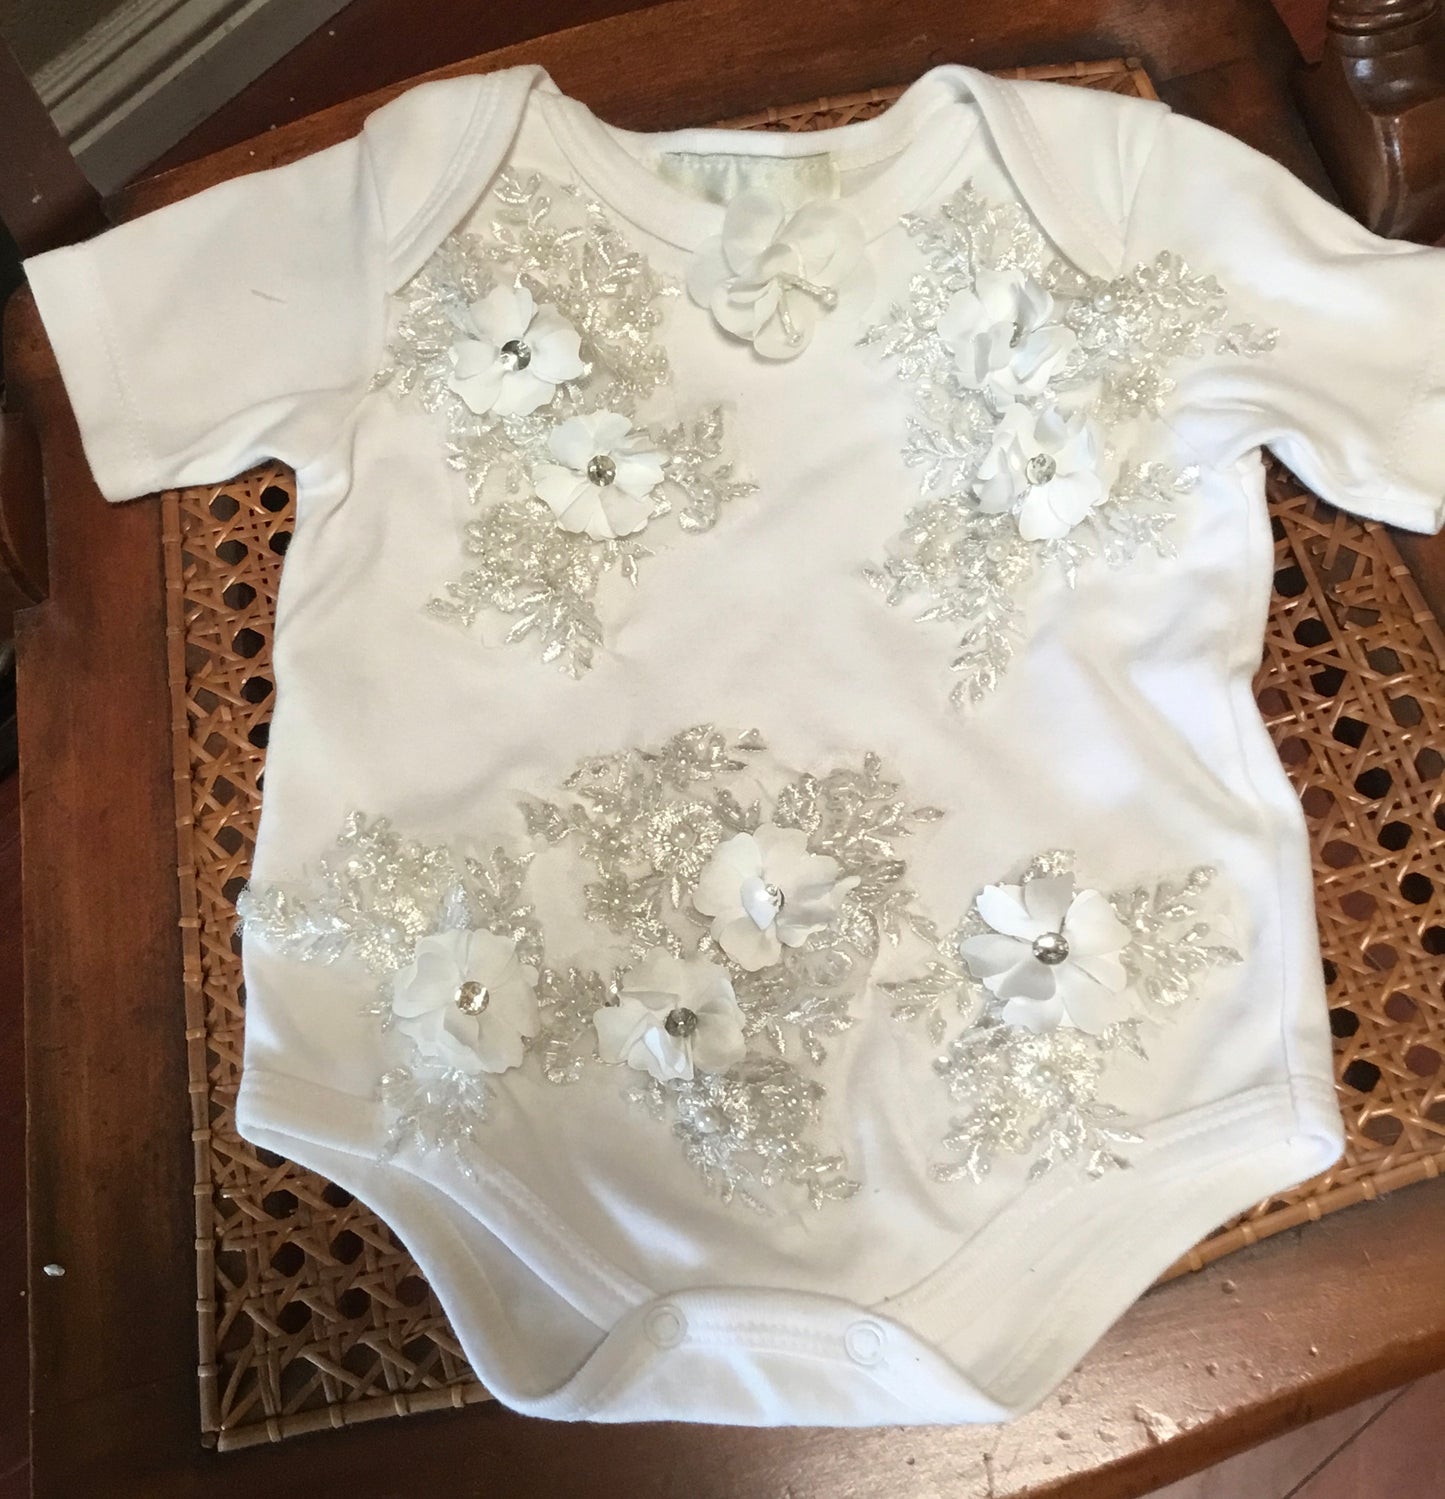 Heirloom Lace Christening Gown - Dior